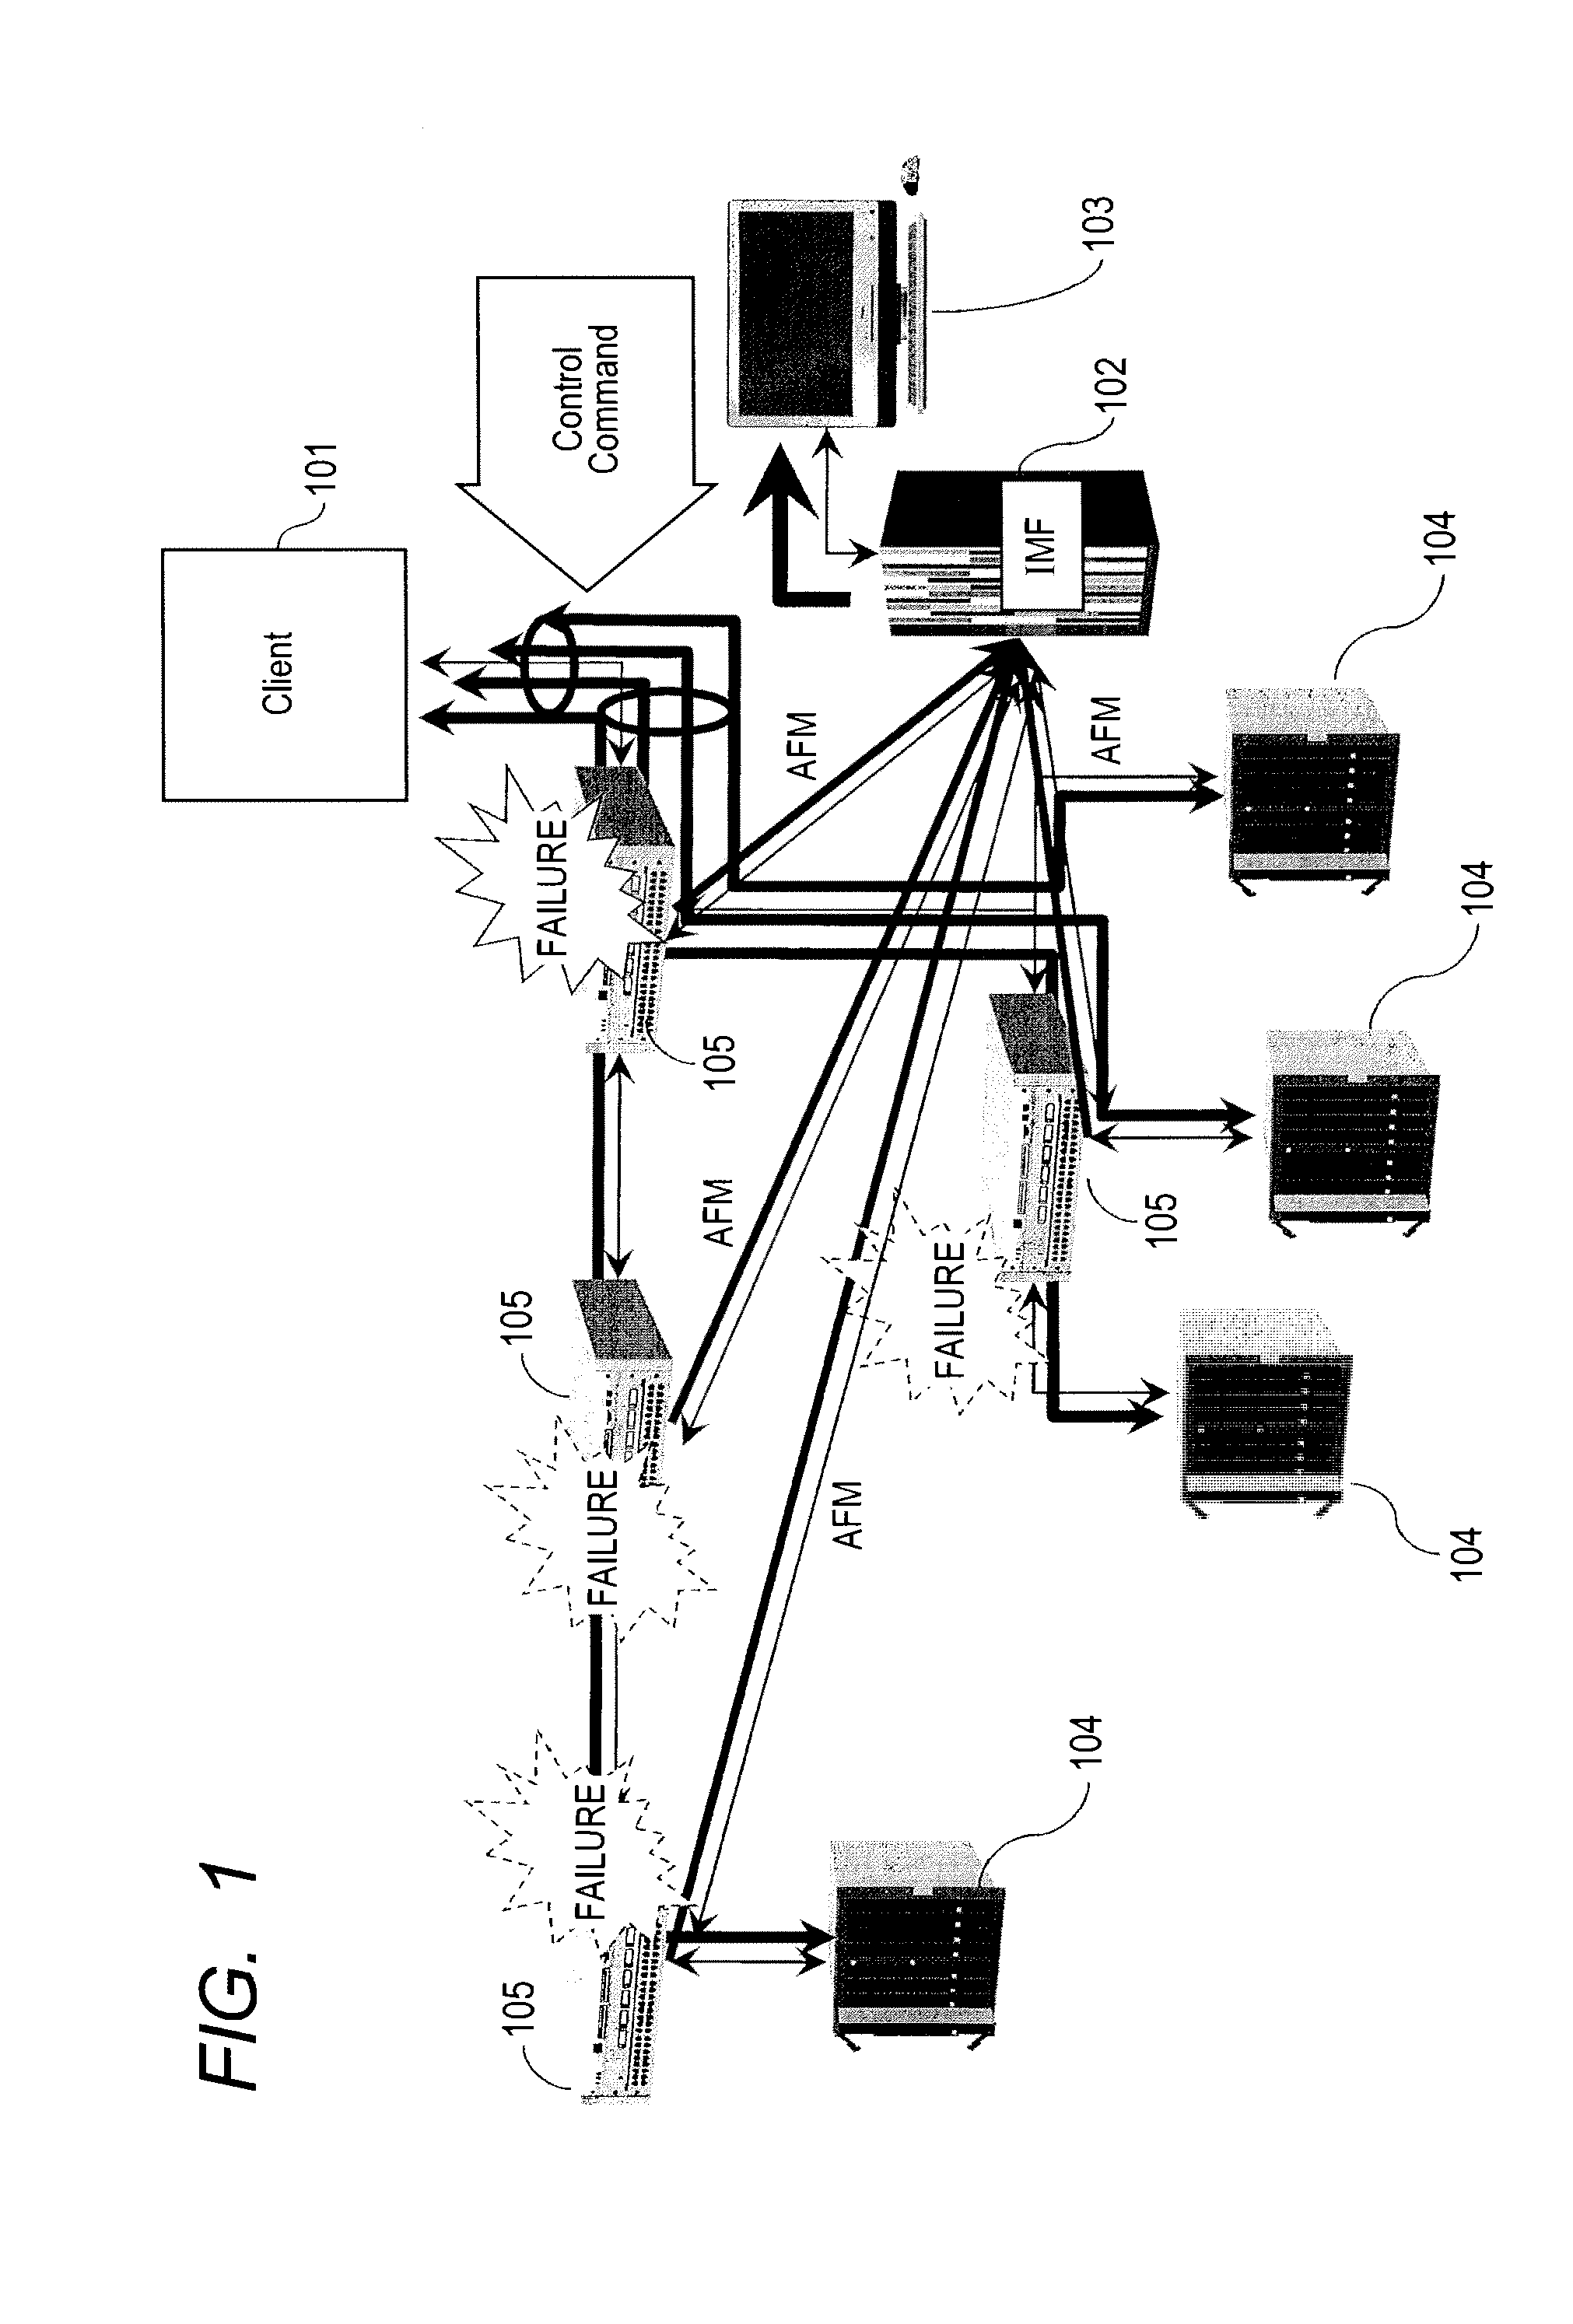 Failure analysis device, and system and method for same